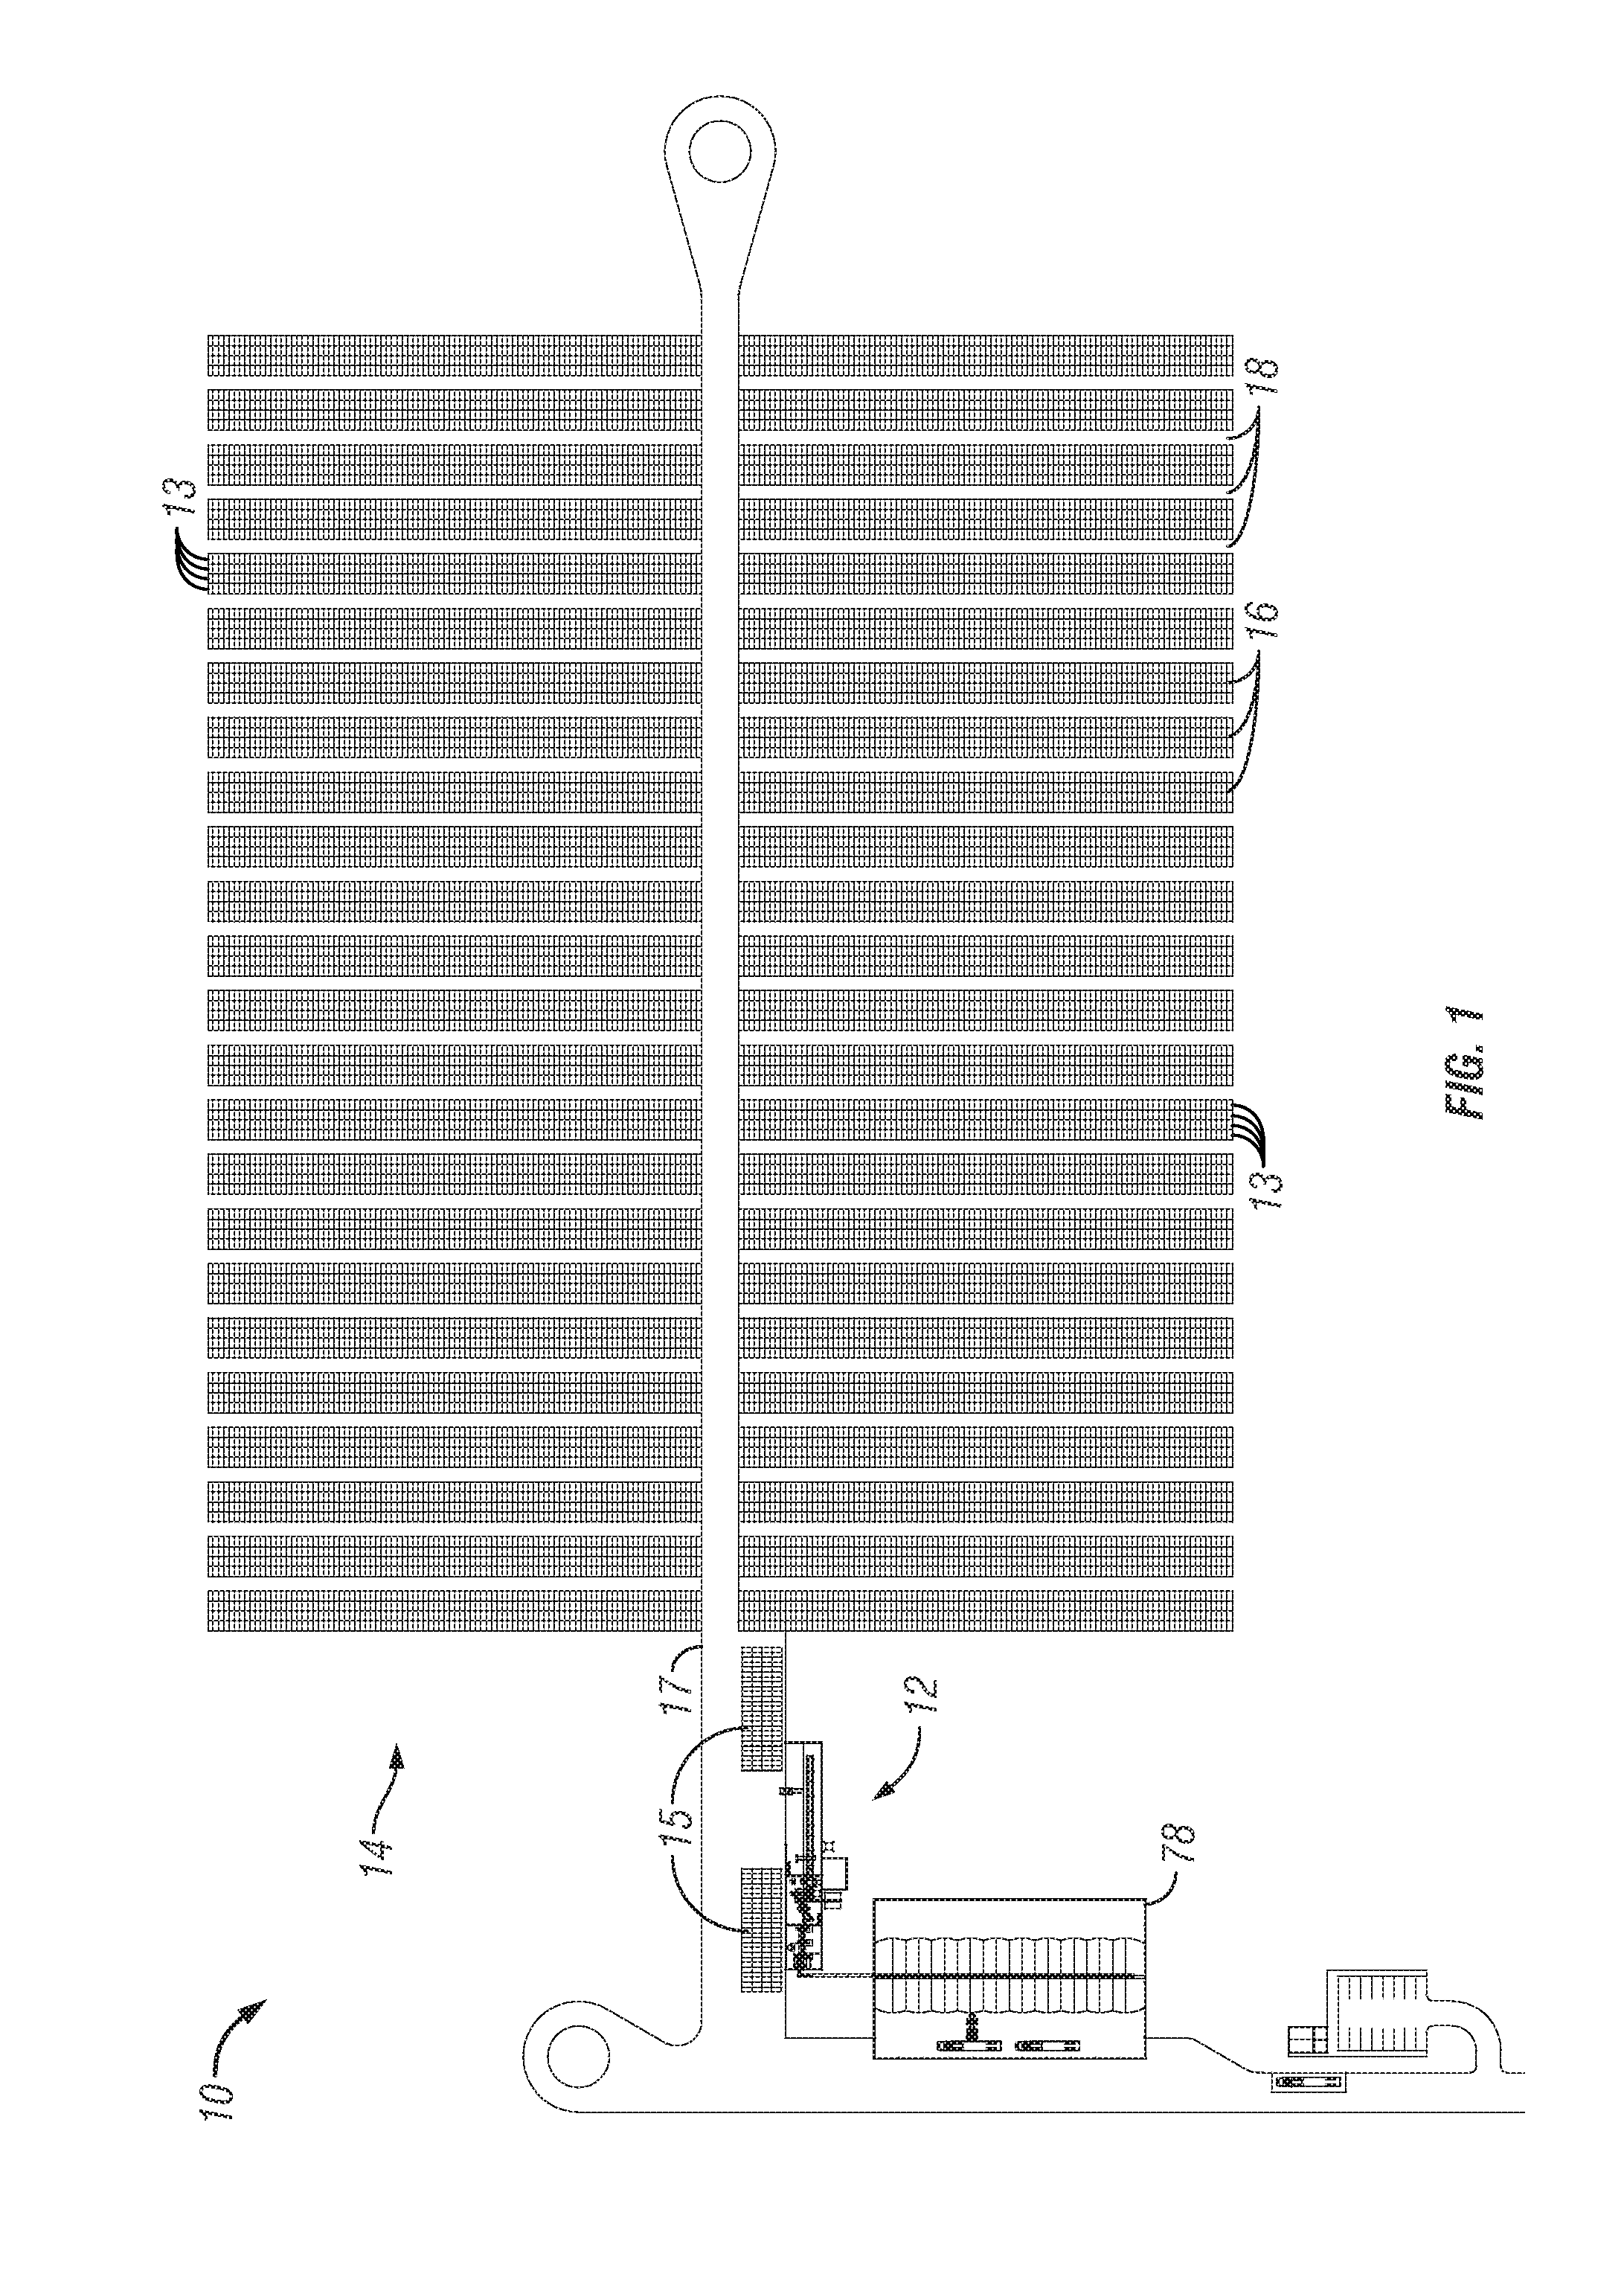 Automated process for handling bales for pellet production